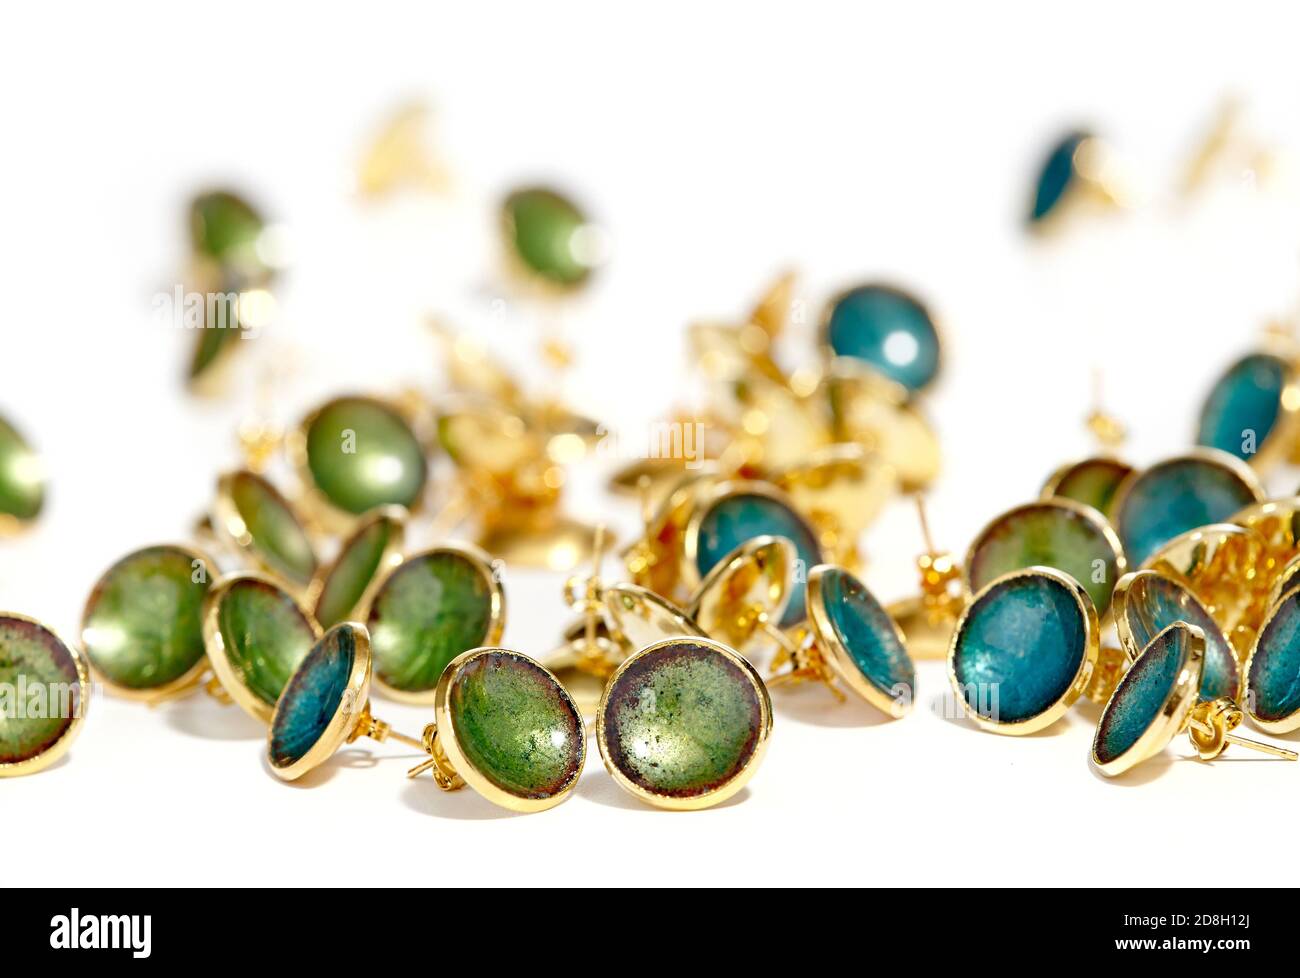 Handmade enamel jewelry by Kiln Design Studio. Seen here are several scattered gold stud earrings with blue or green enamel photographed on a white ba Stock Photo